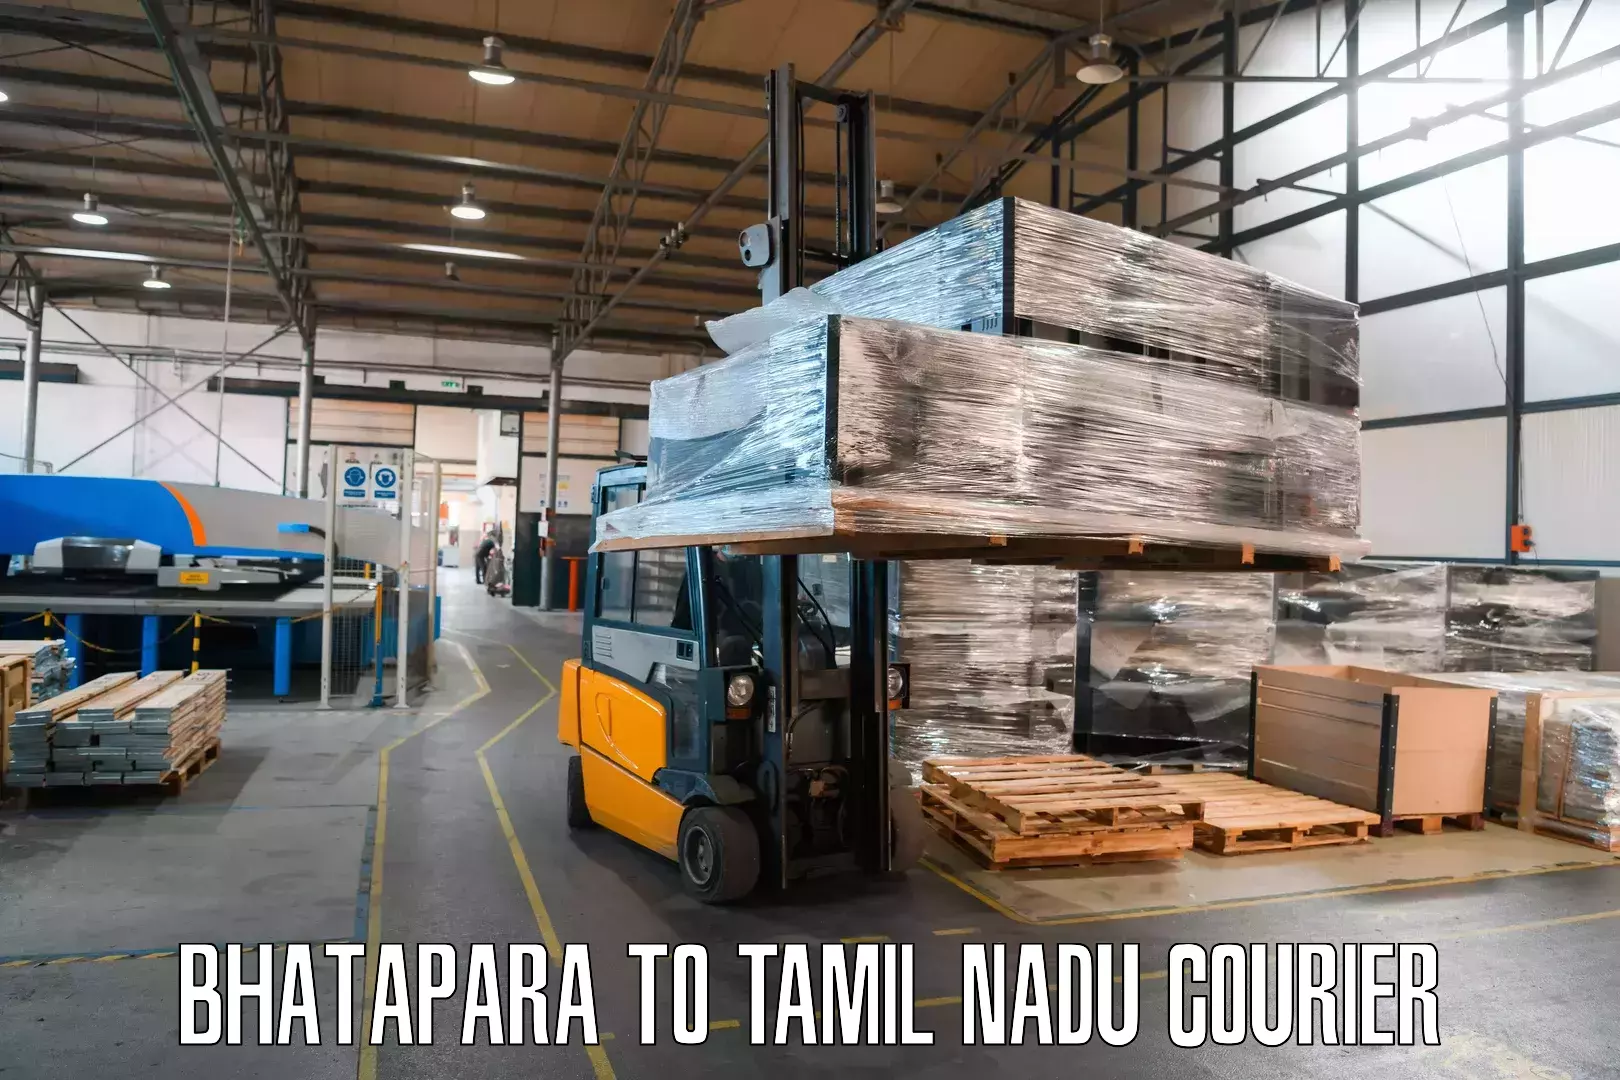 Express delivery capabilities in Bhatapara to Vellore Institute of Technology